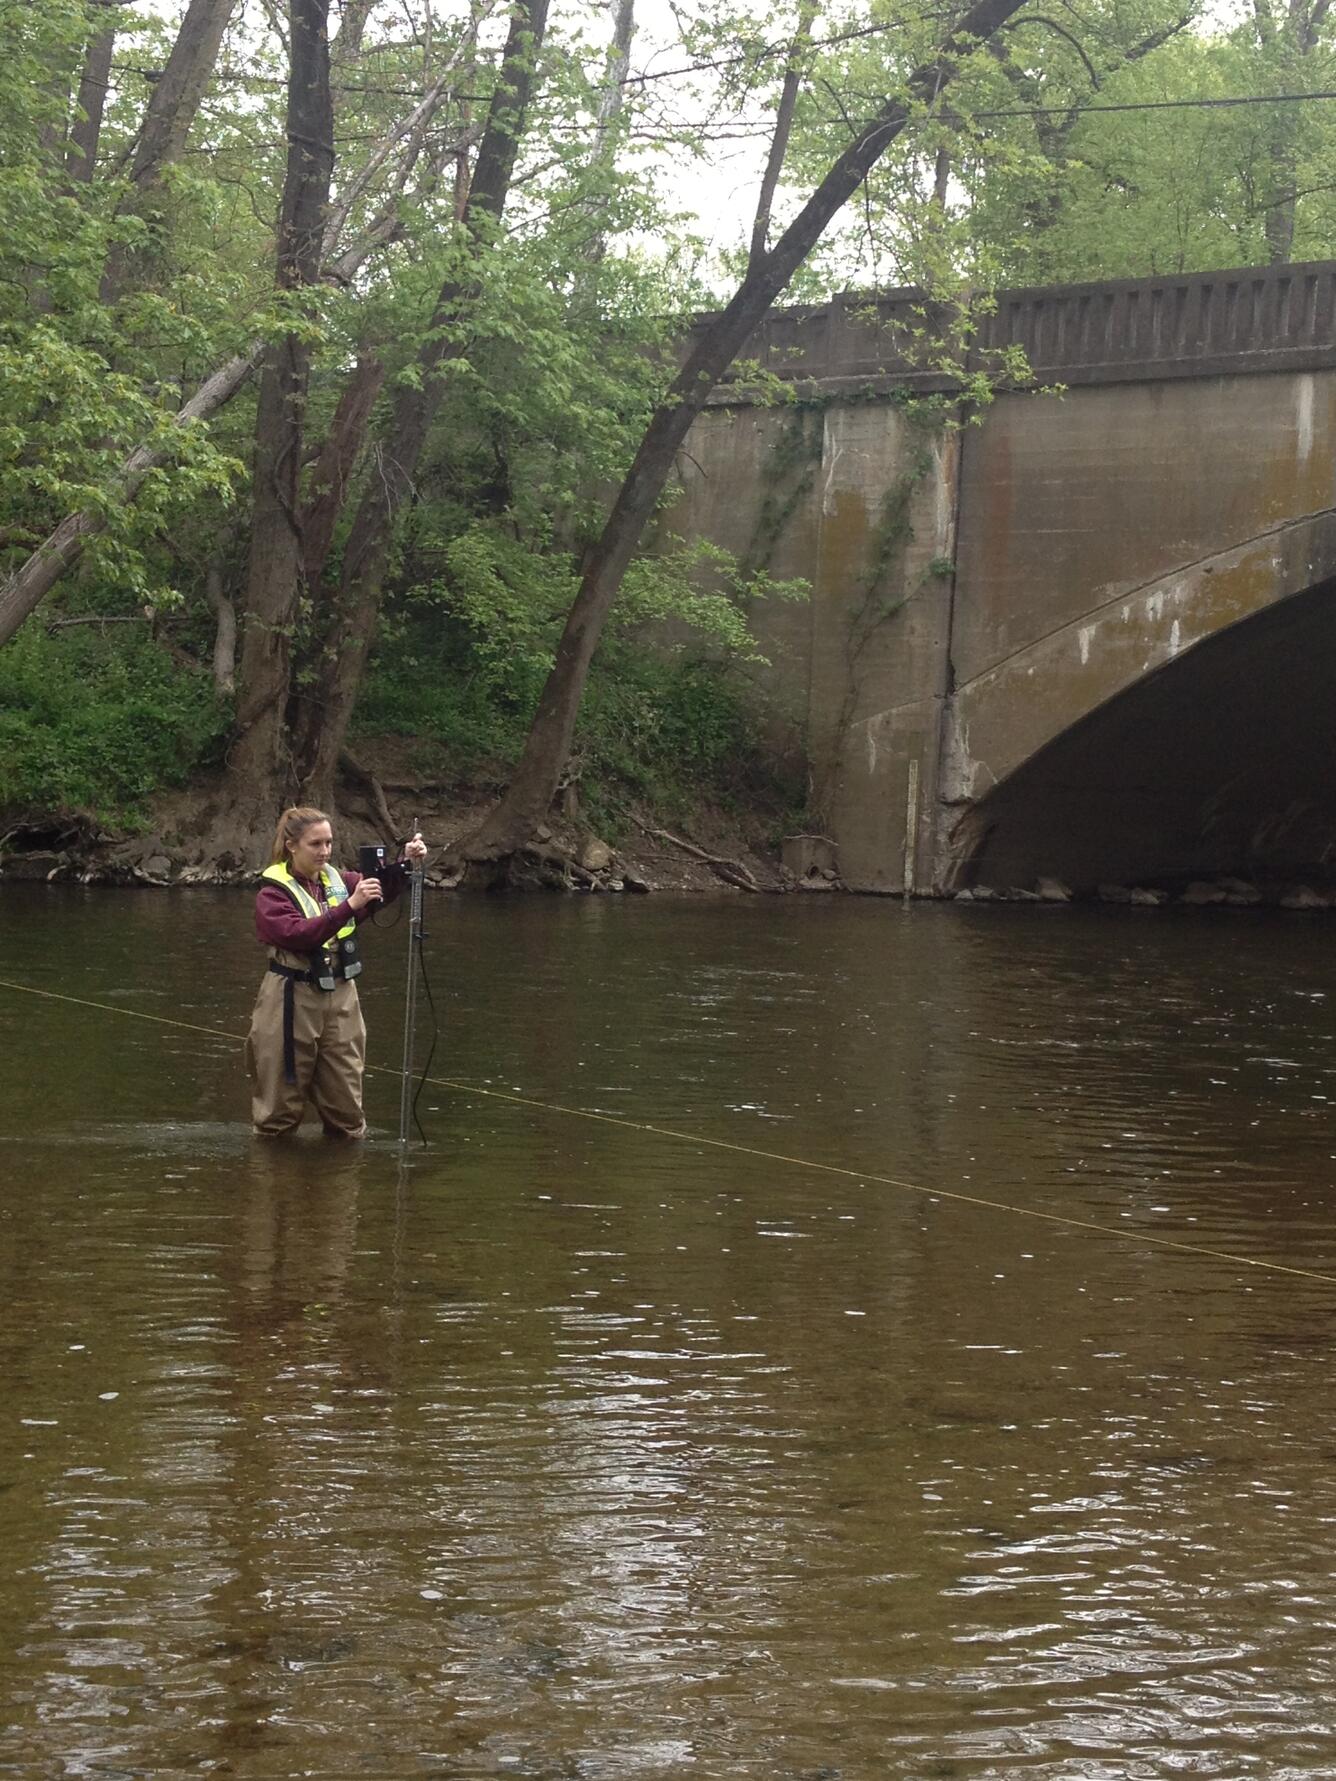 USGS Personnel wading across a river